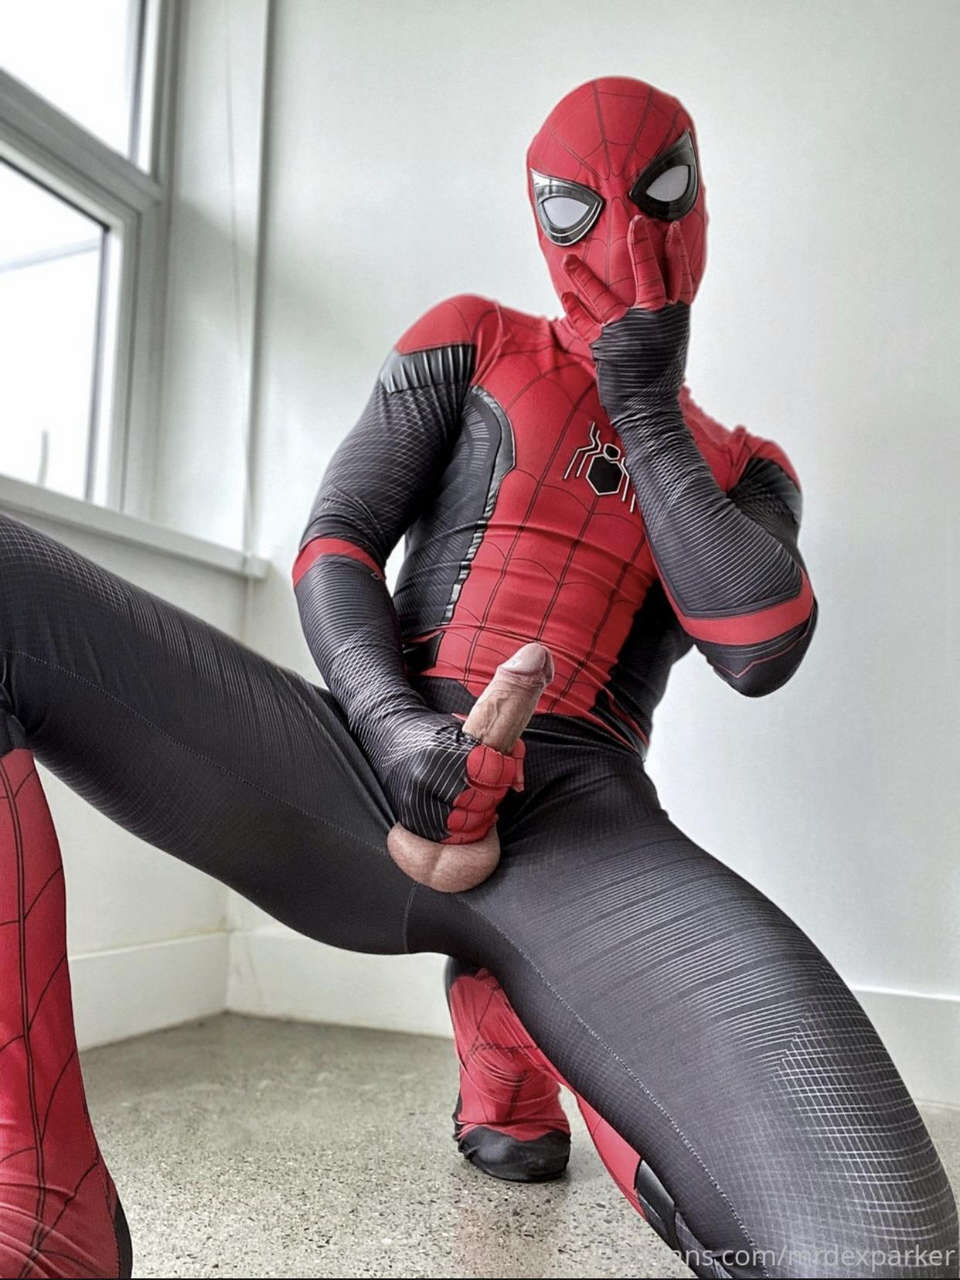 Had A Blast Putting Together This Solo Erotic Spidey Se